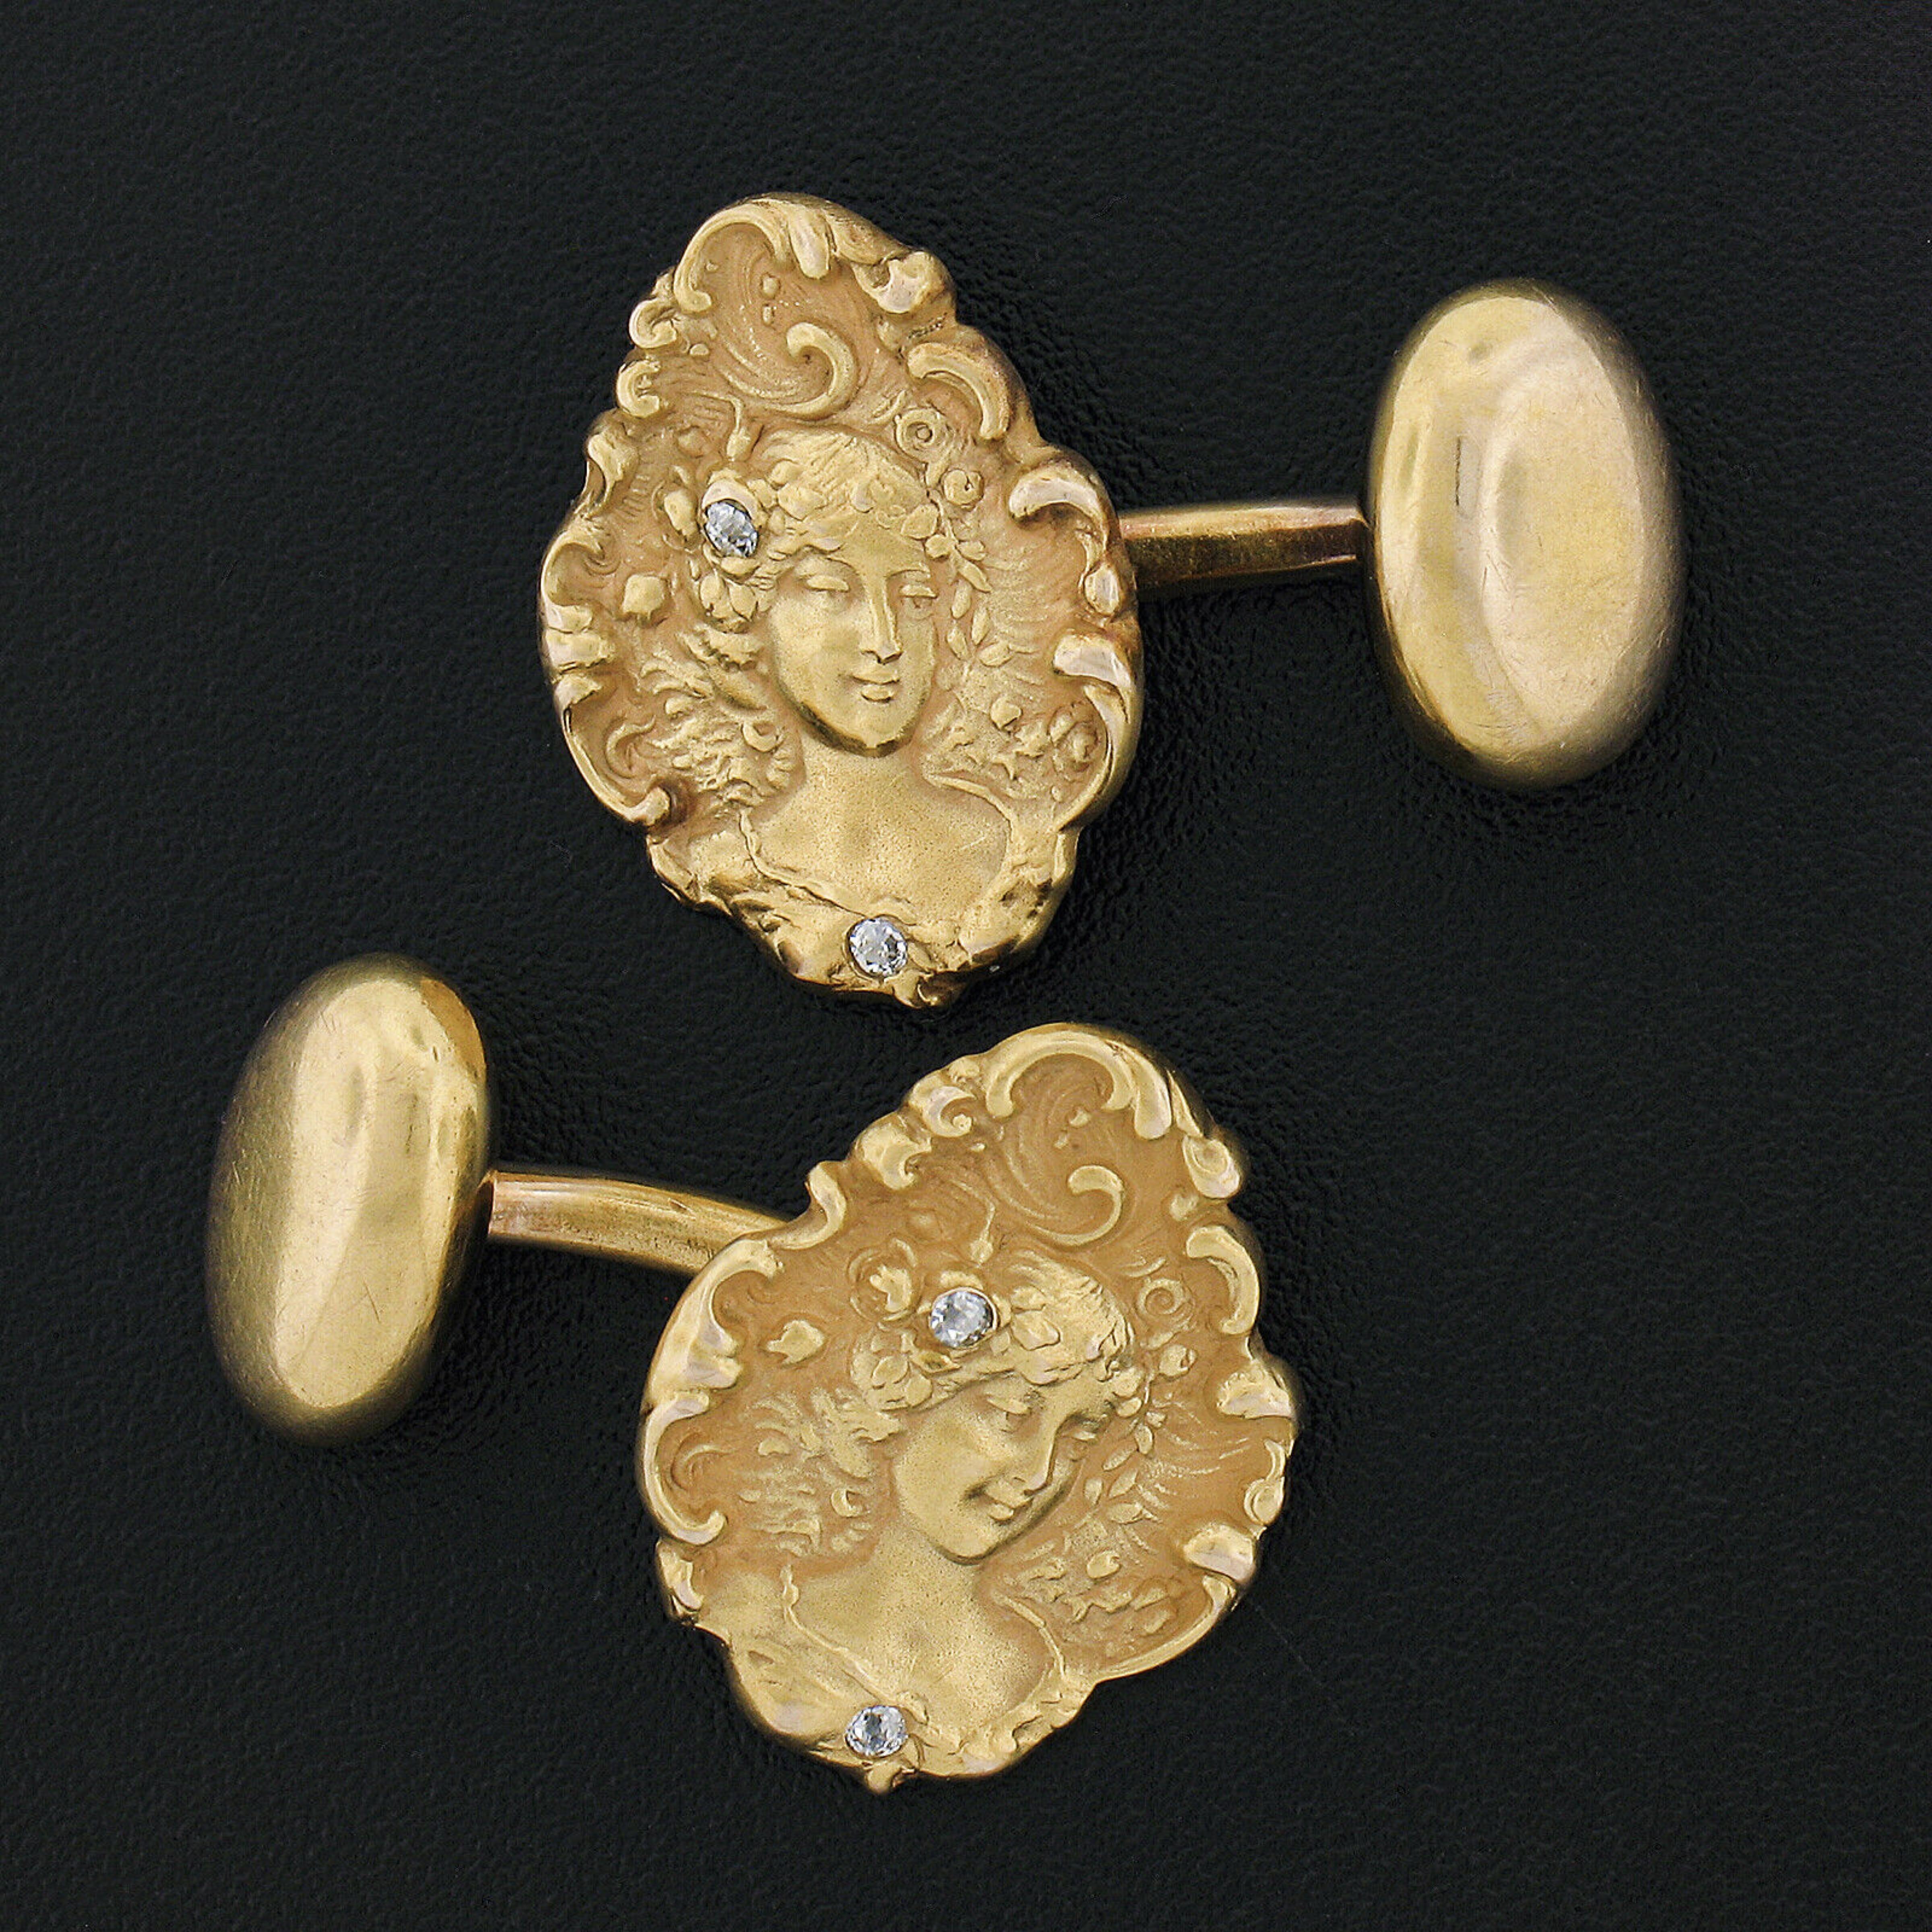 These fine art nouveau period cuff links are crafted in solid 14k yellow gold and feature absolutely spectacular detailing throughout their front panel showing a lovely nymph lady design at their center surrounded by intricate scroll work with